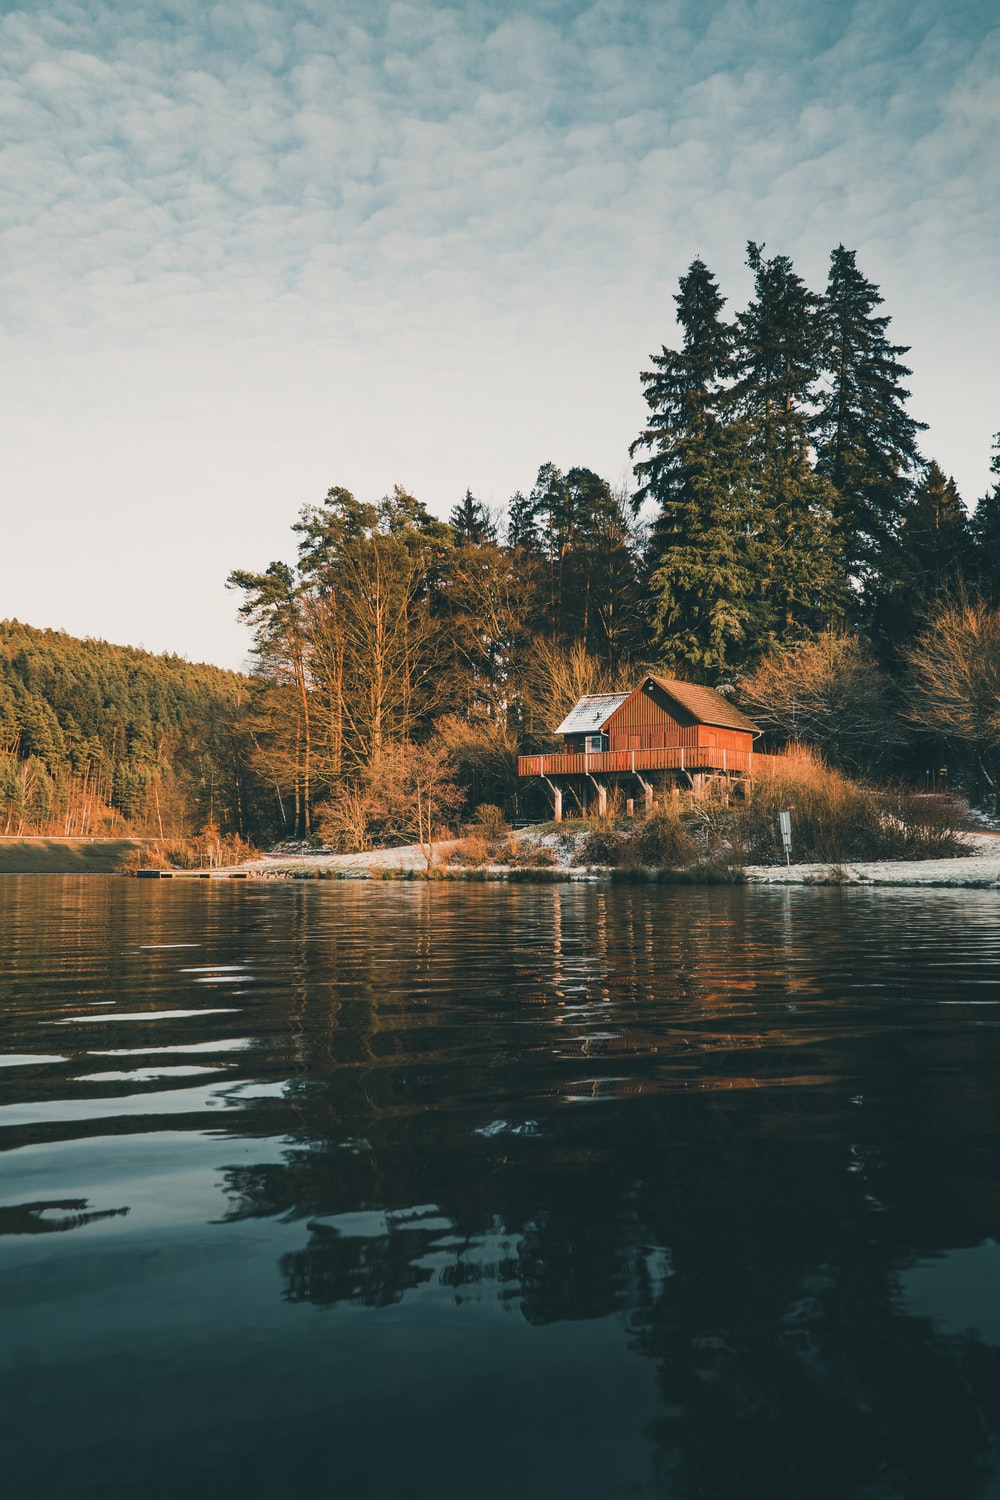 Lake House Picture. Download Free Image